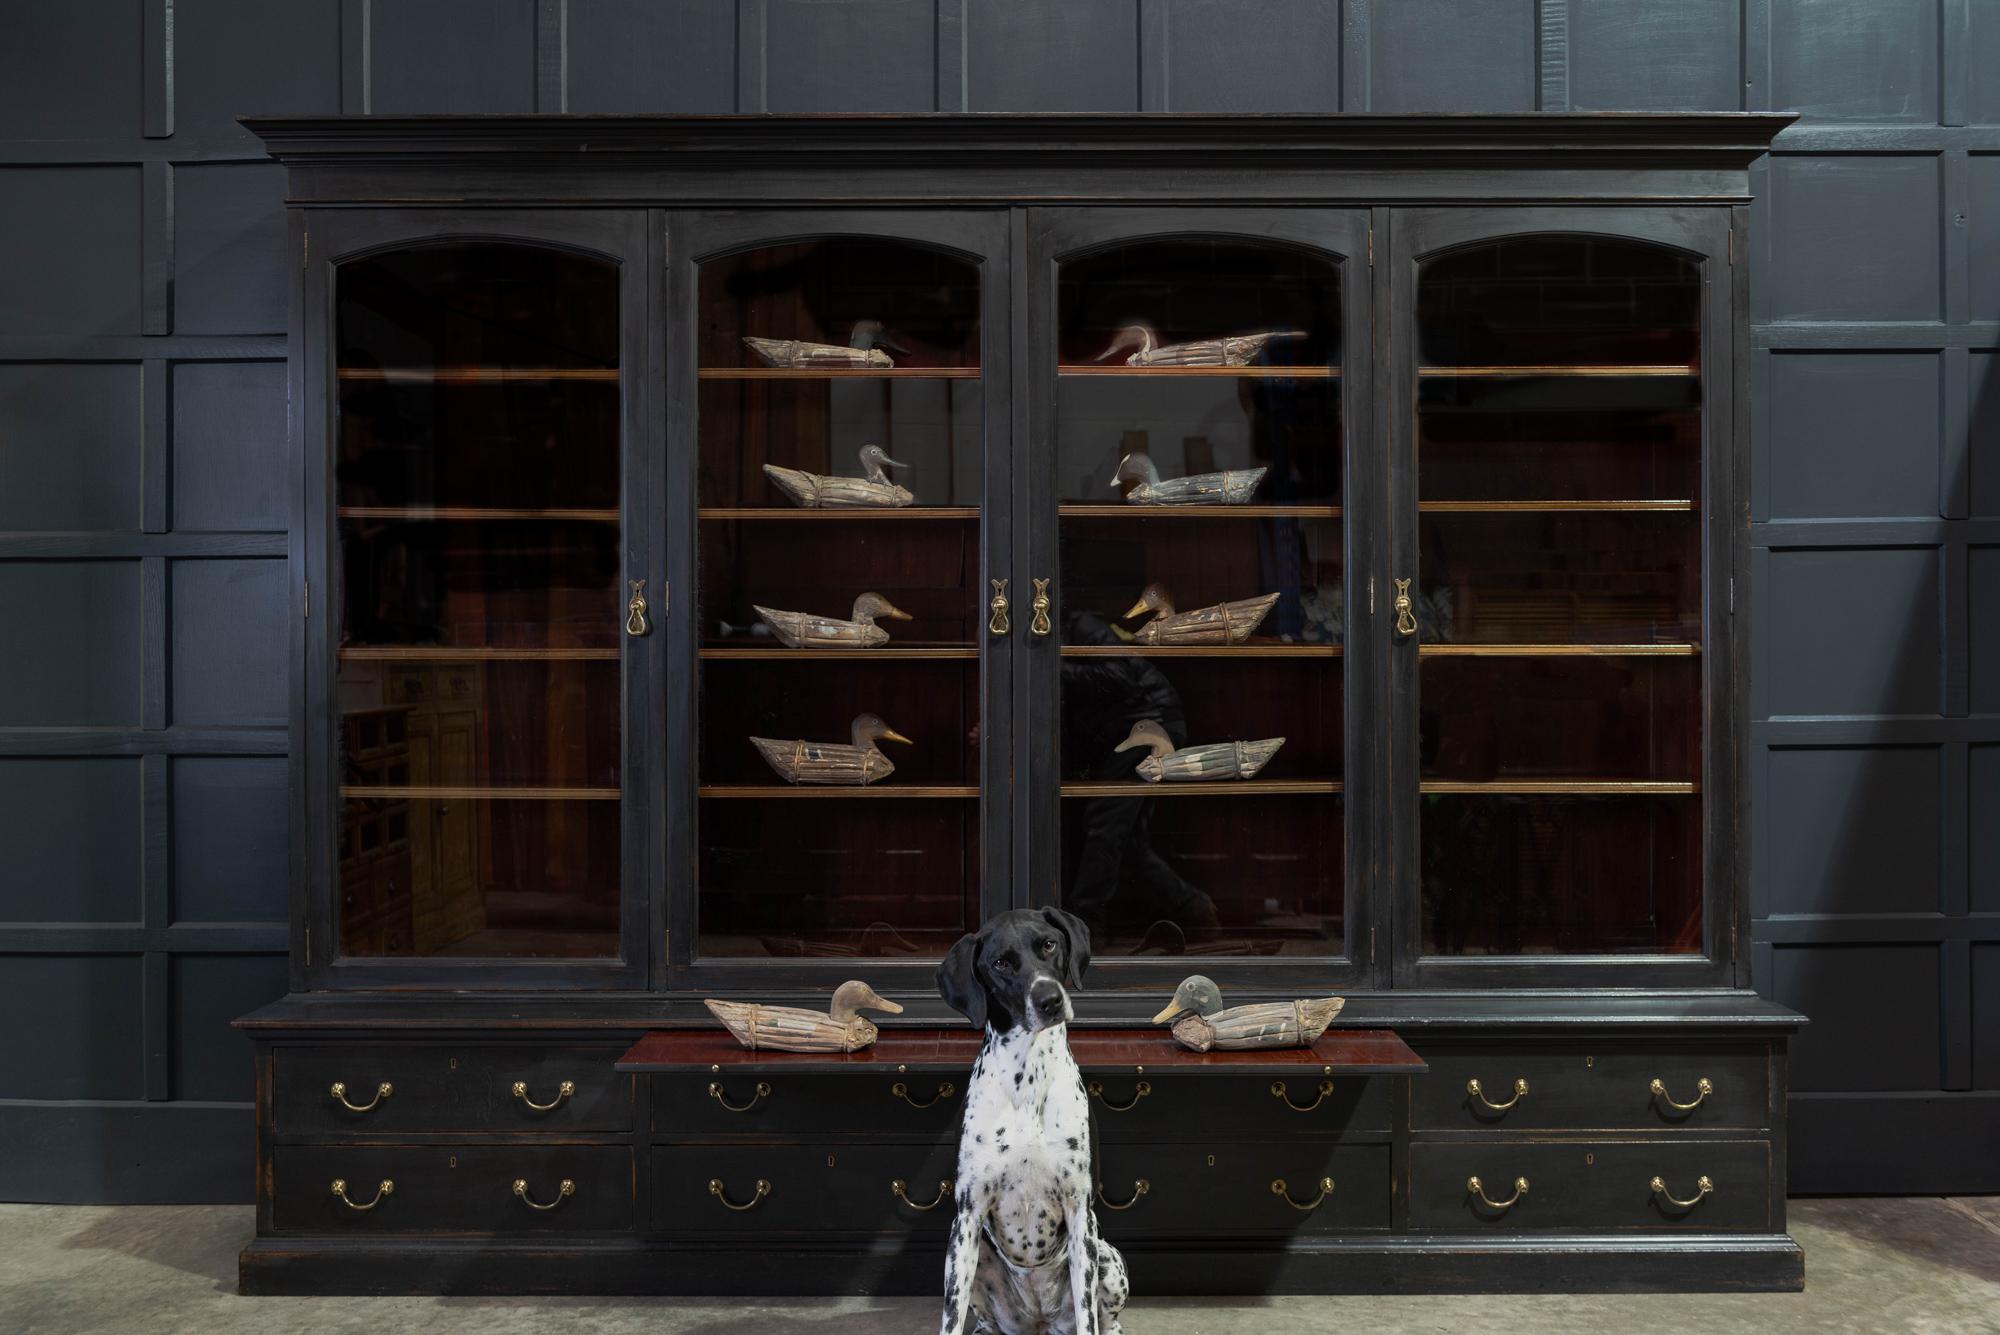 Waring & Gillows glazed ebonised mahogany bookcase
circa 1897-1903.

Superb quality Waring & Gillows 4 door glazed ebonised bookcase - Stamped ‘Warings Oxford st London W’. Solid mahogany with original heavy hand blown glass glazed doors, 1 master